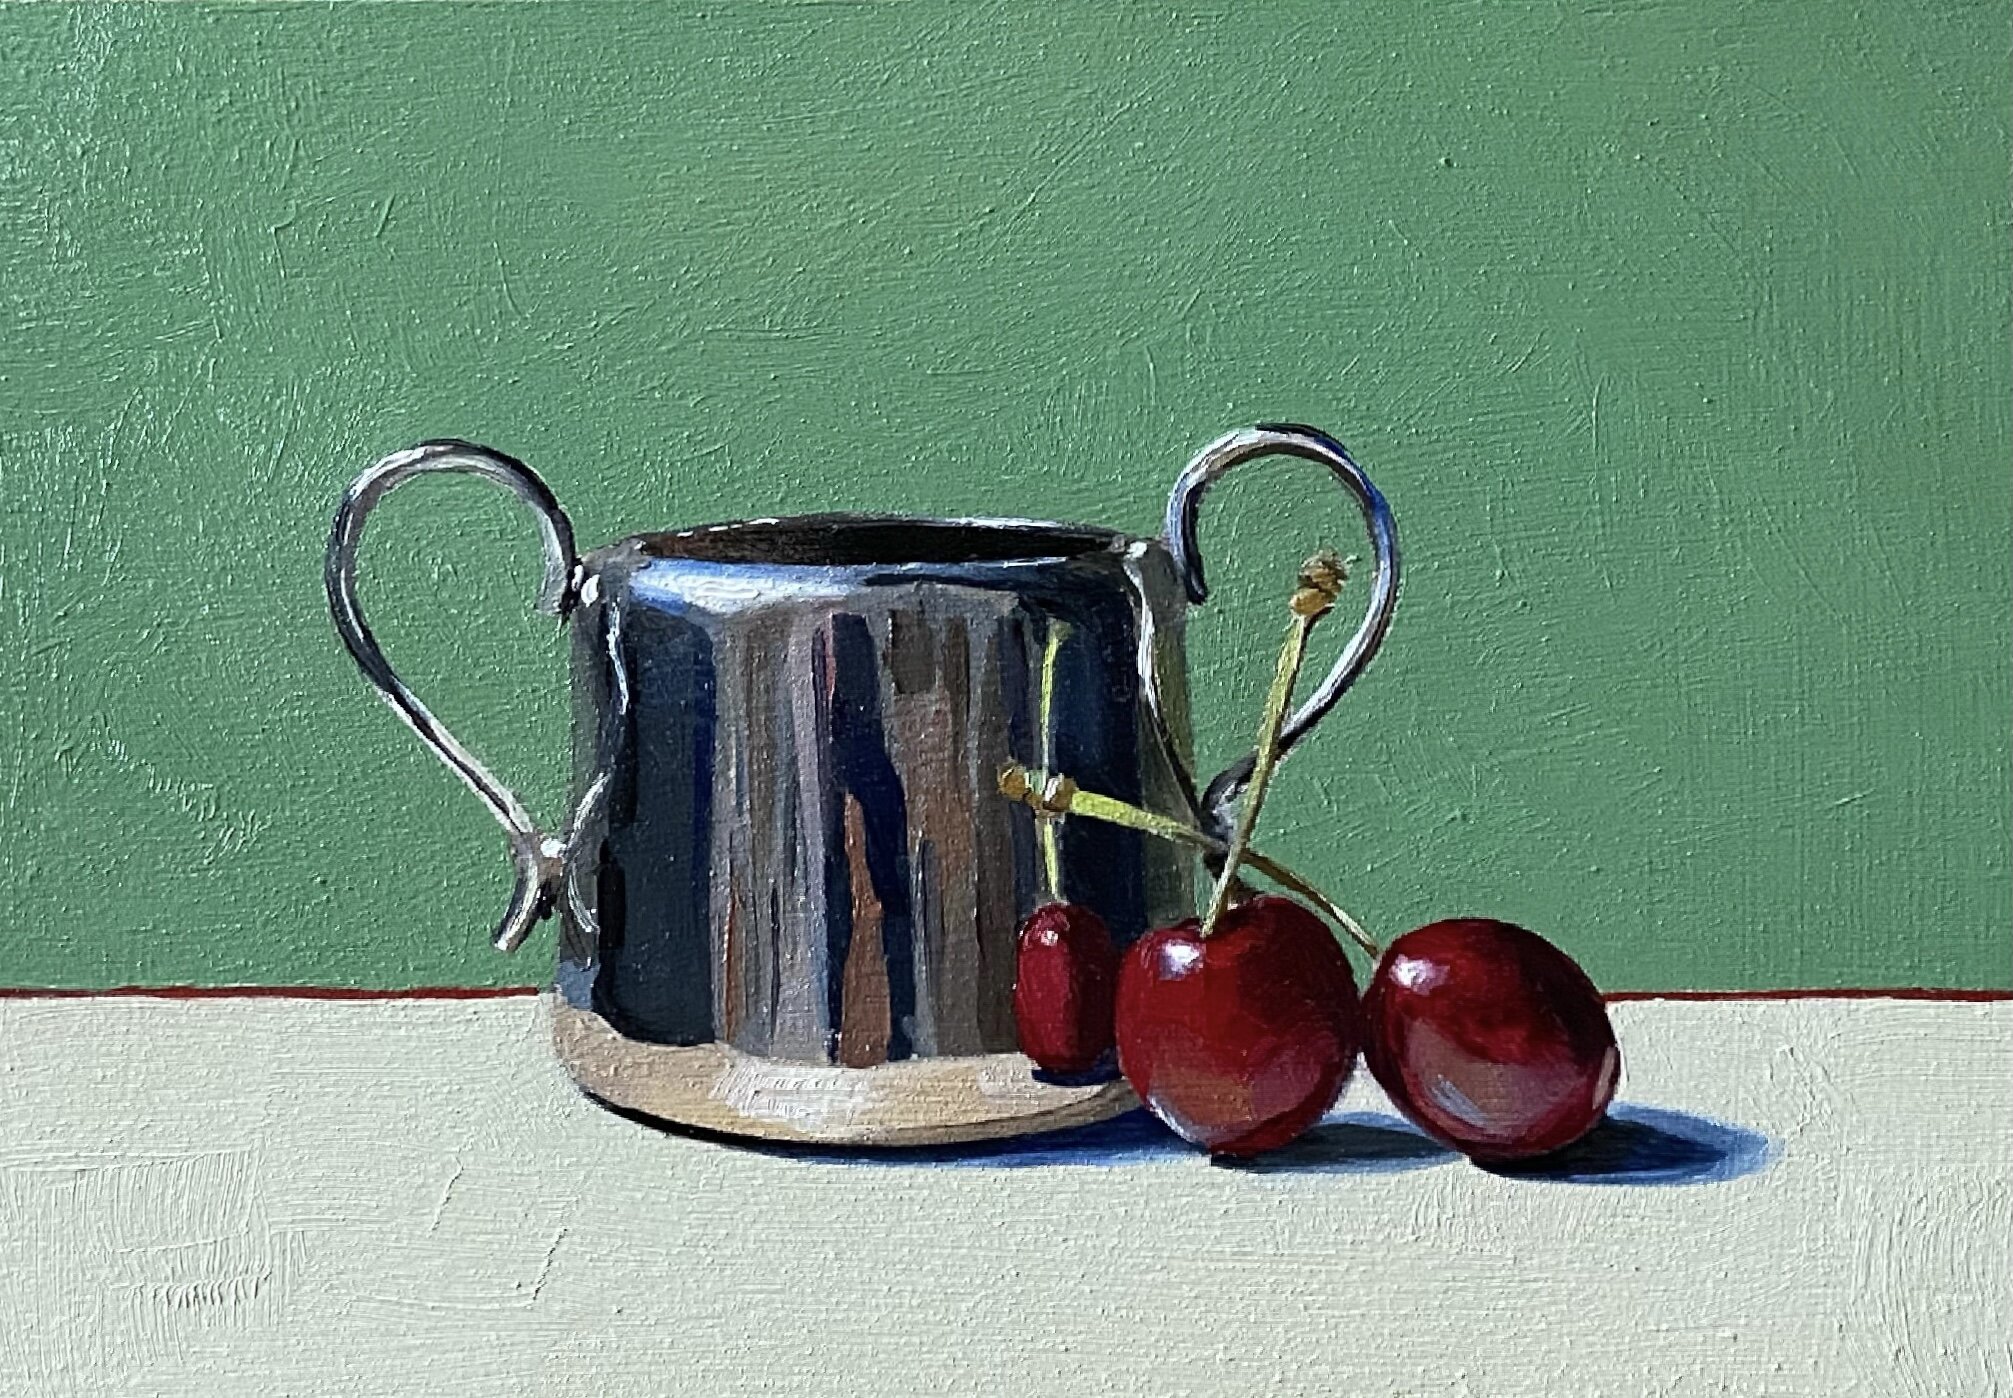 Silver sugar pot with red cherries